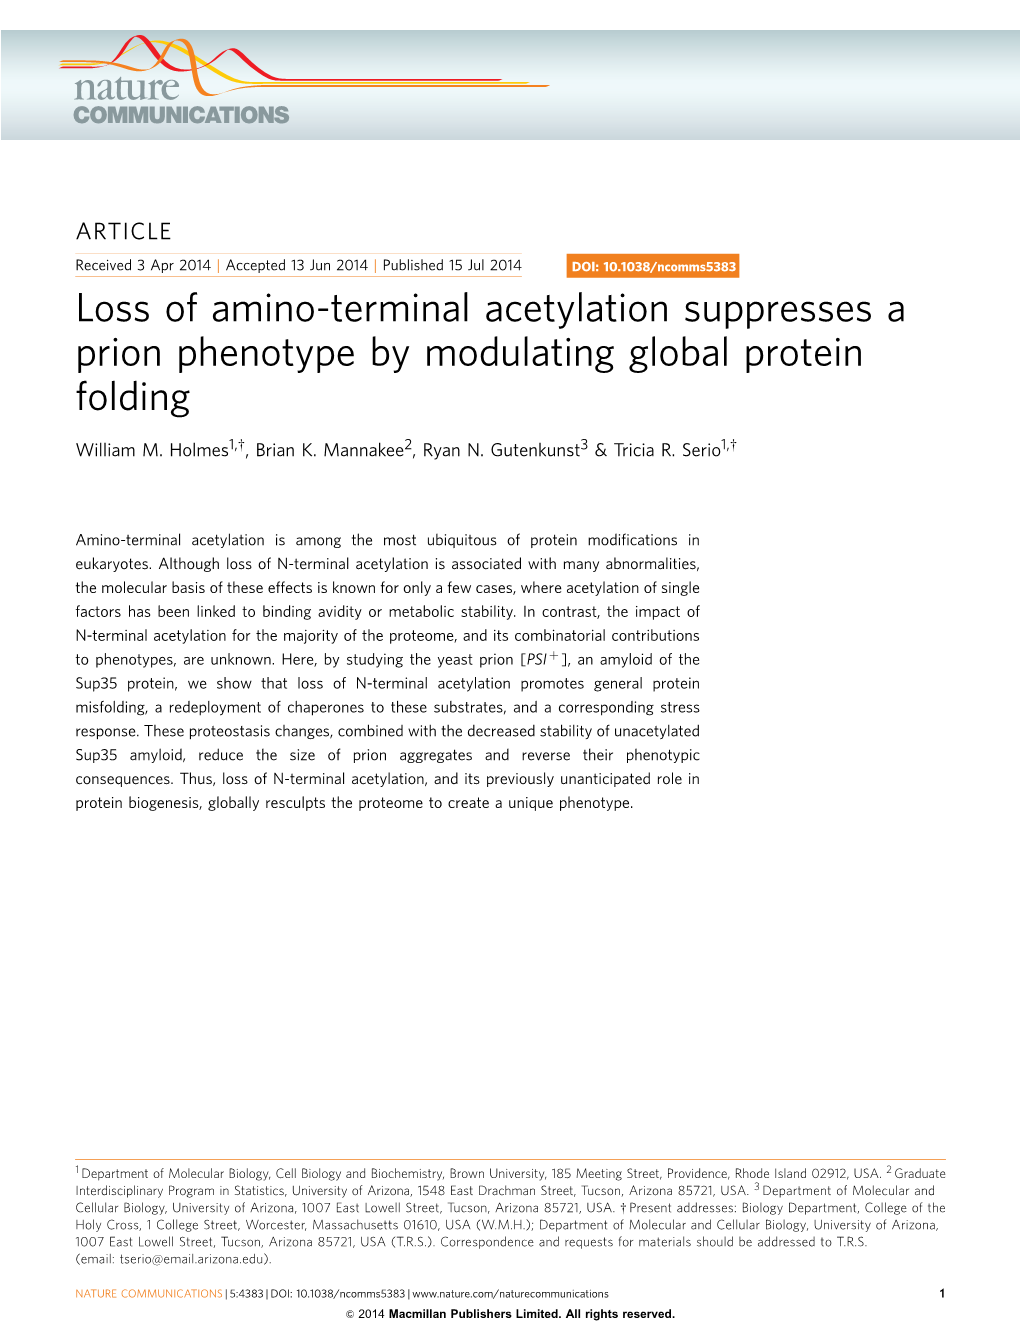 Loss of Amino-Terminal Acetylation Suppresses a Prion Phenotype by Modulating Global Protein Folding